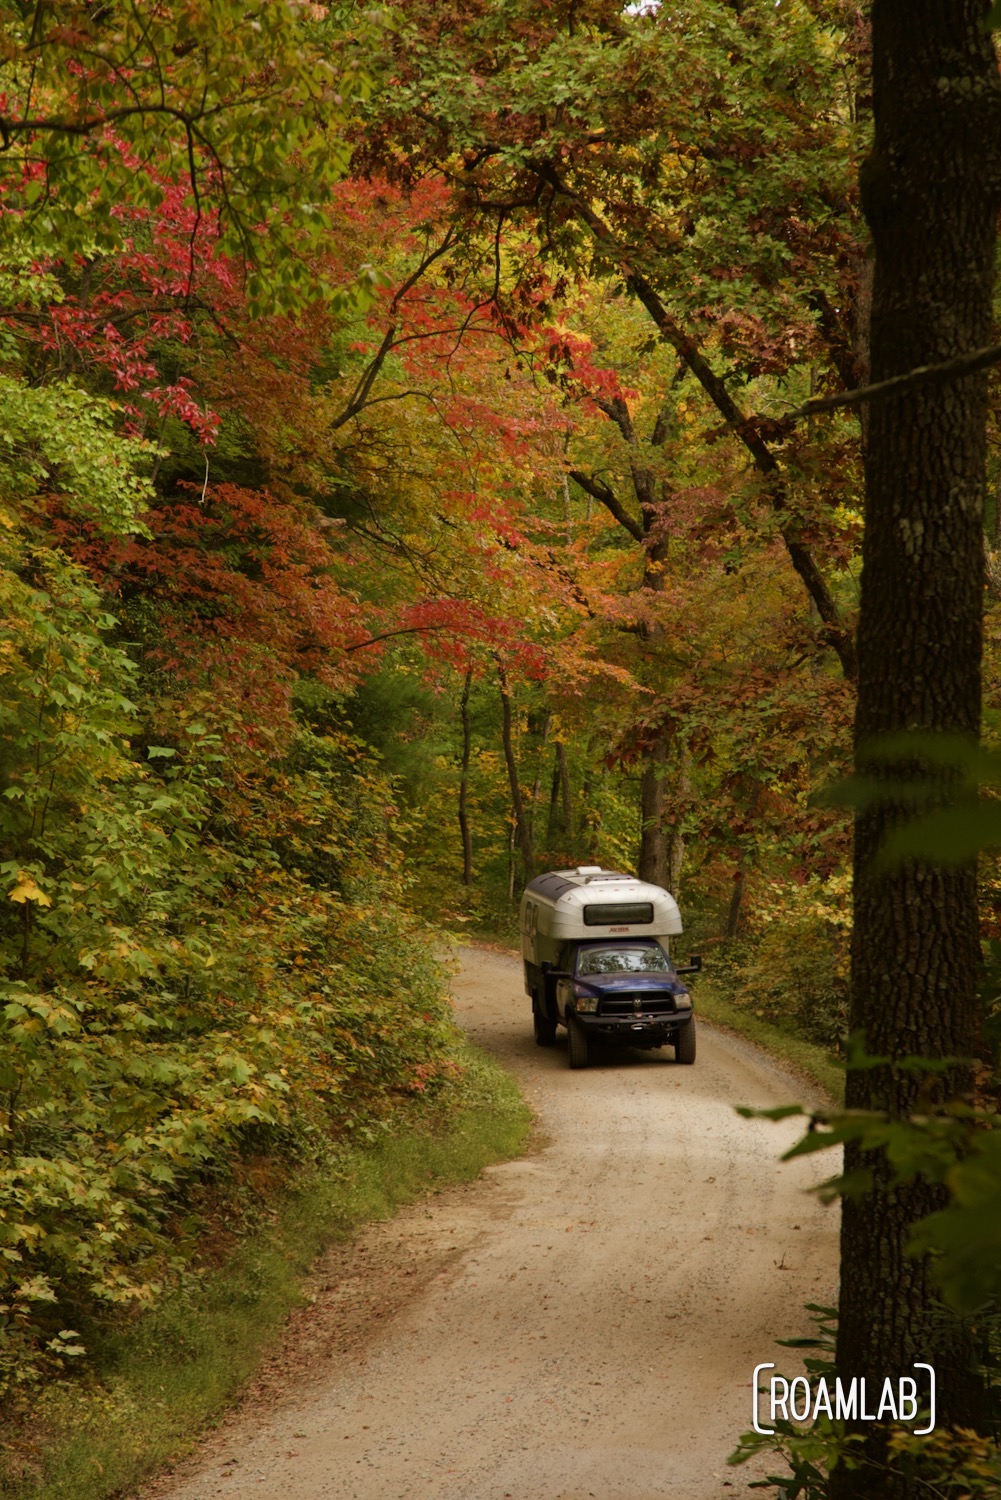 Bright fall colors surrounding a 1970 Avion C11 truck camper driving along the dirt Old North Carolina 105 in Linville Gorge Wilderness Area.